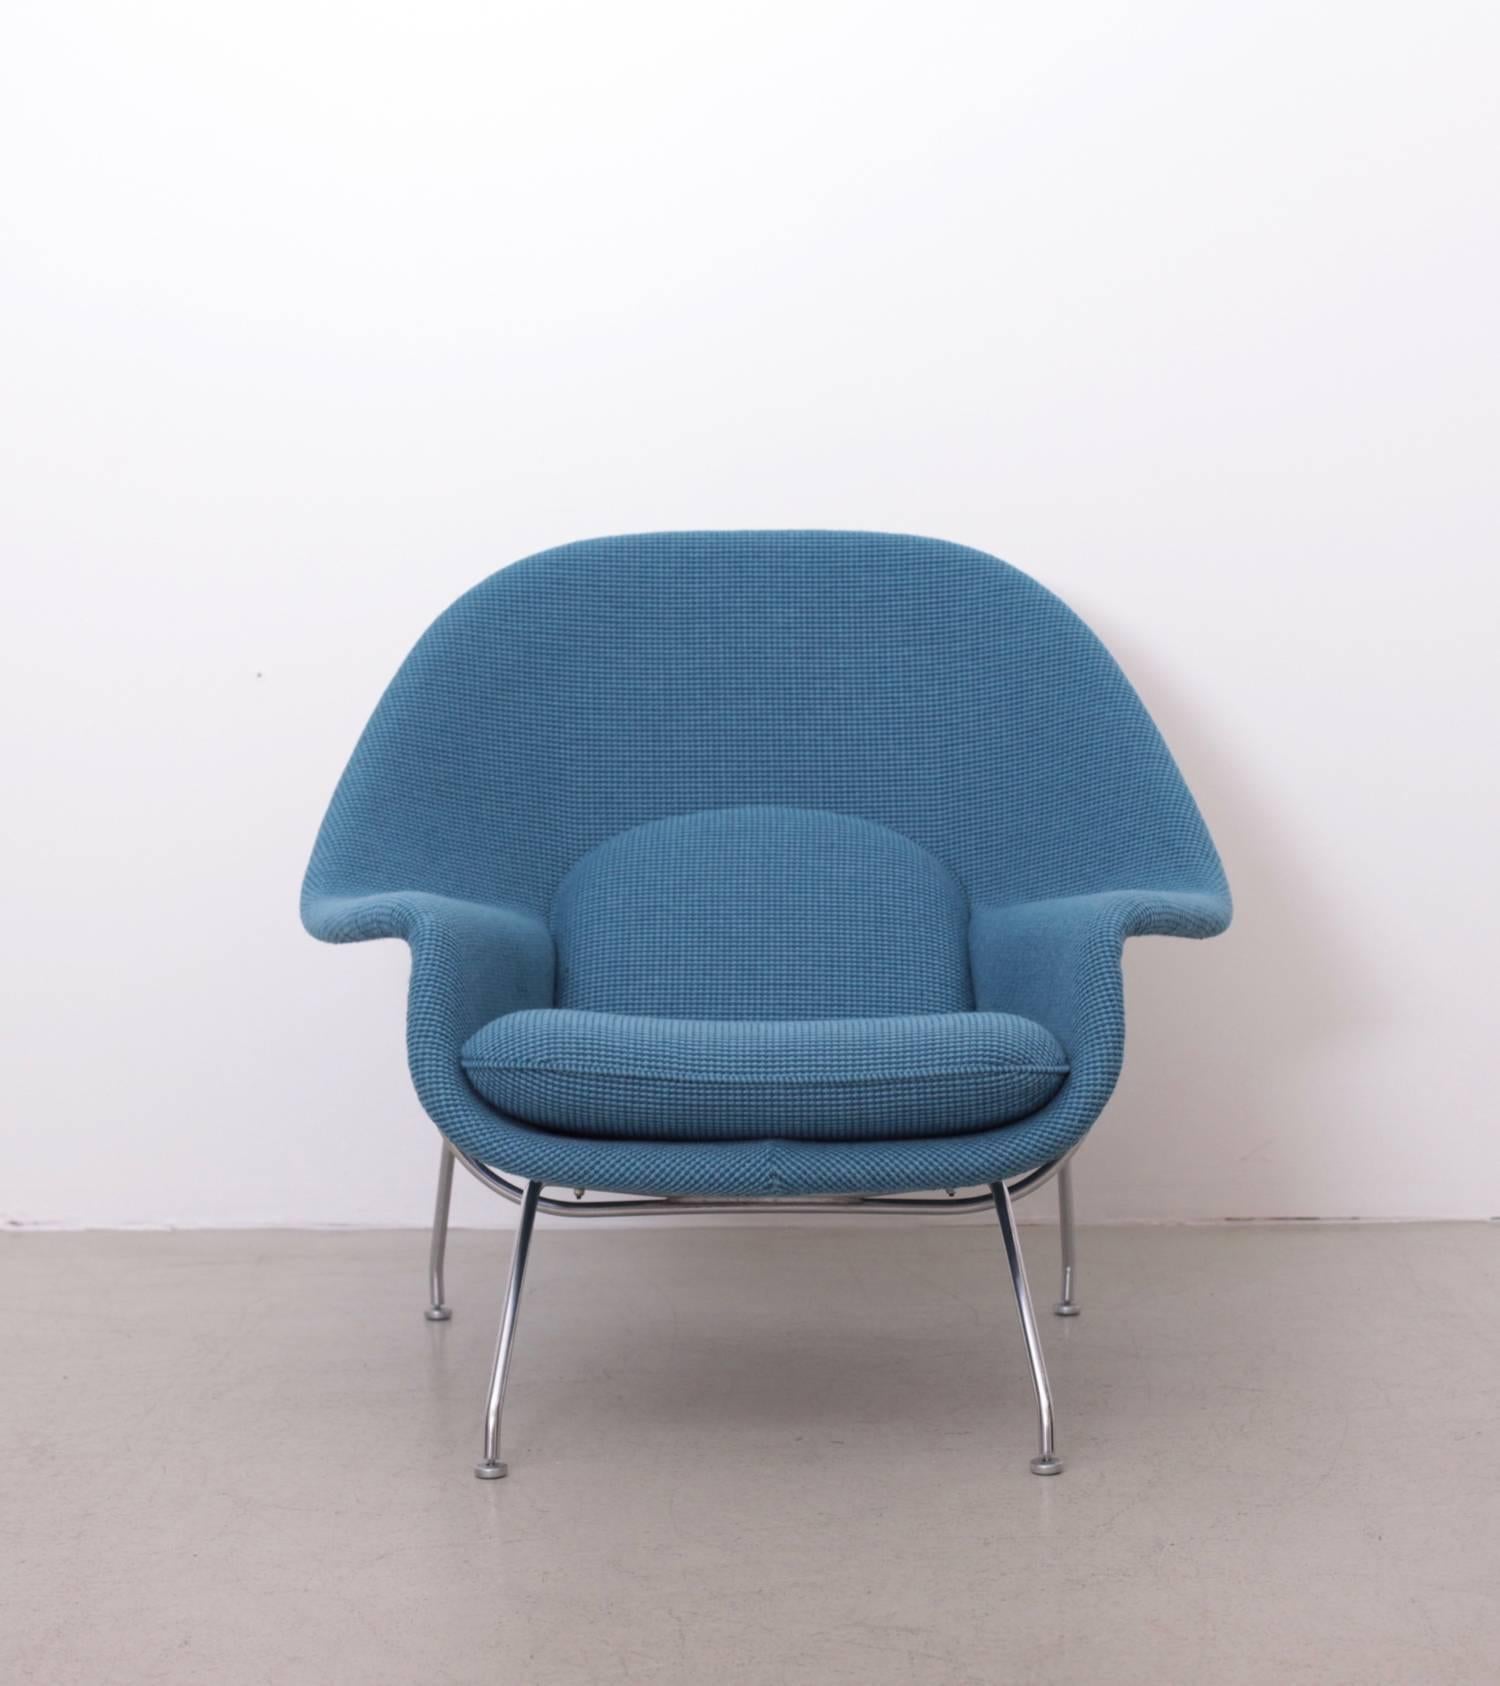 Newly upholstered Knoll womb chair in Cato fabric, 1960s production.